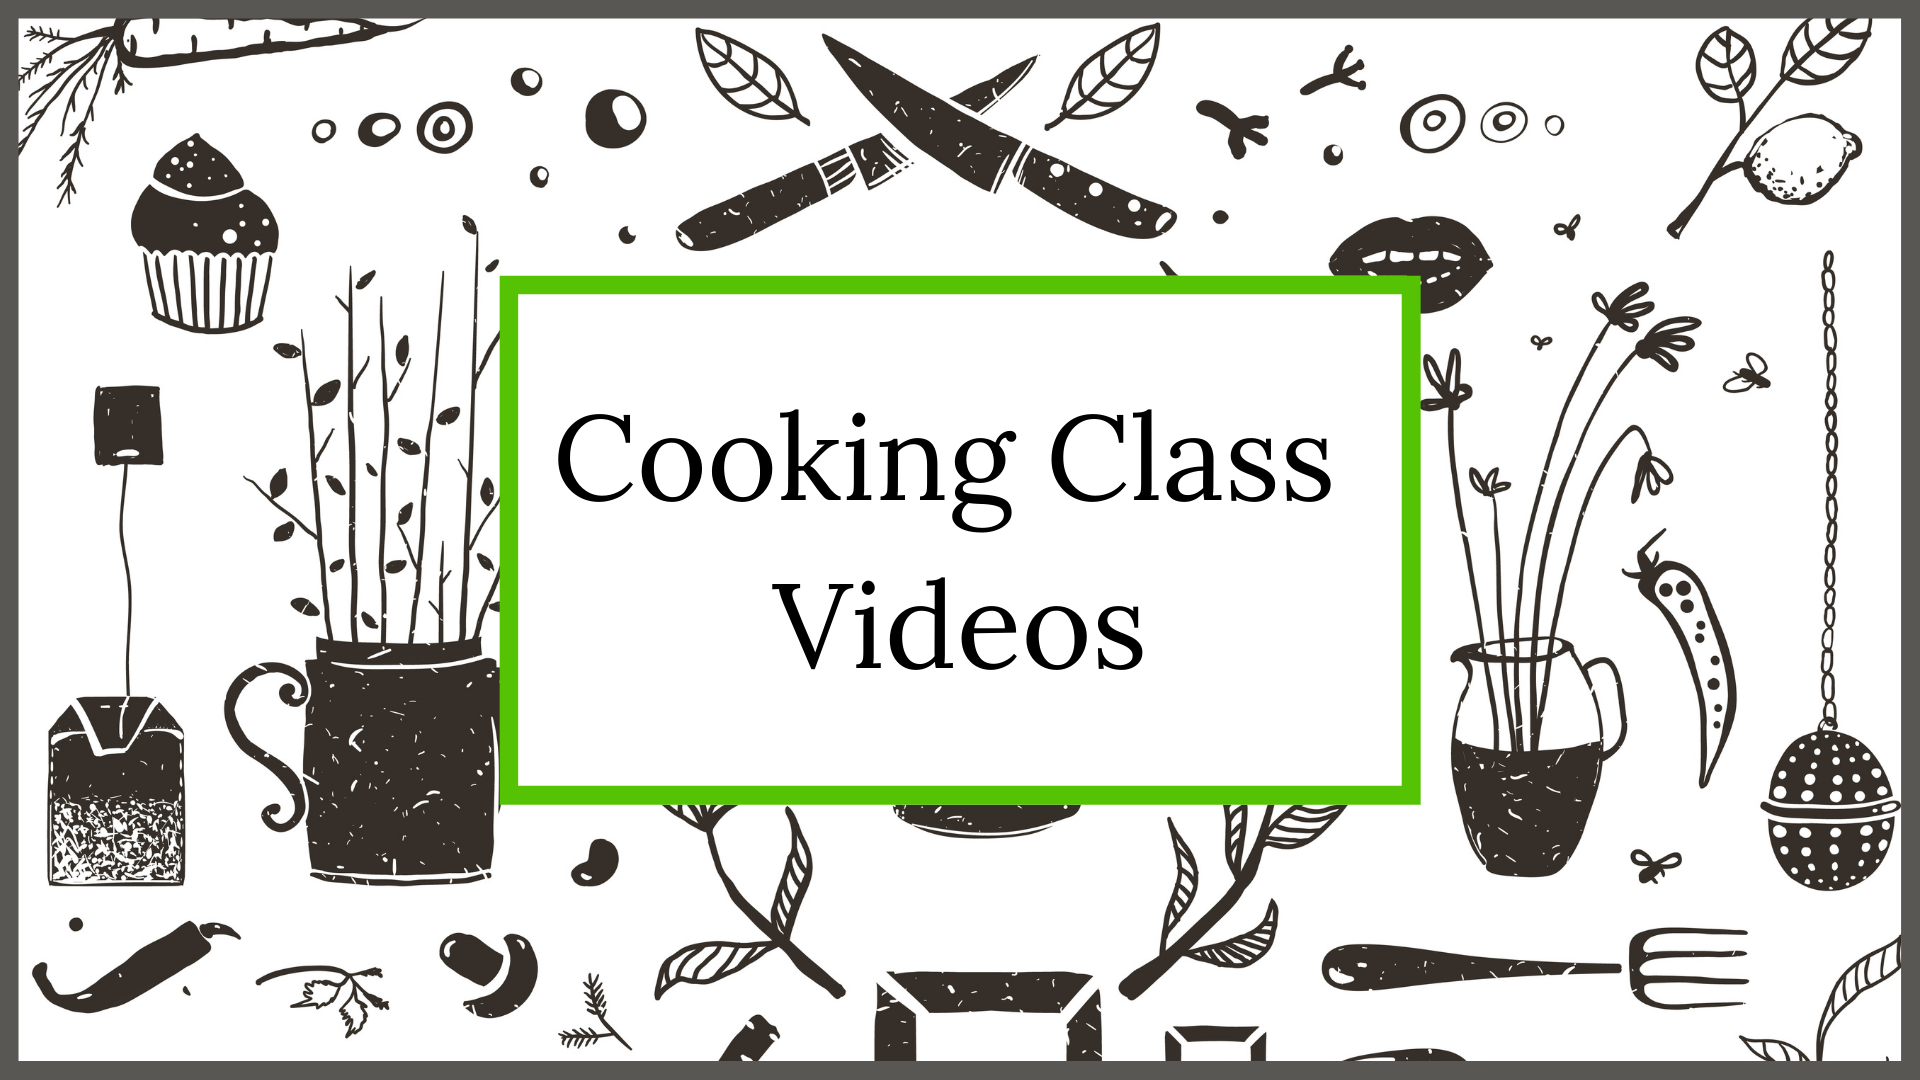 Cooking Class Video Recordings